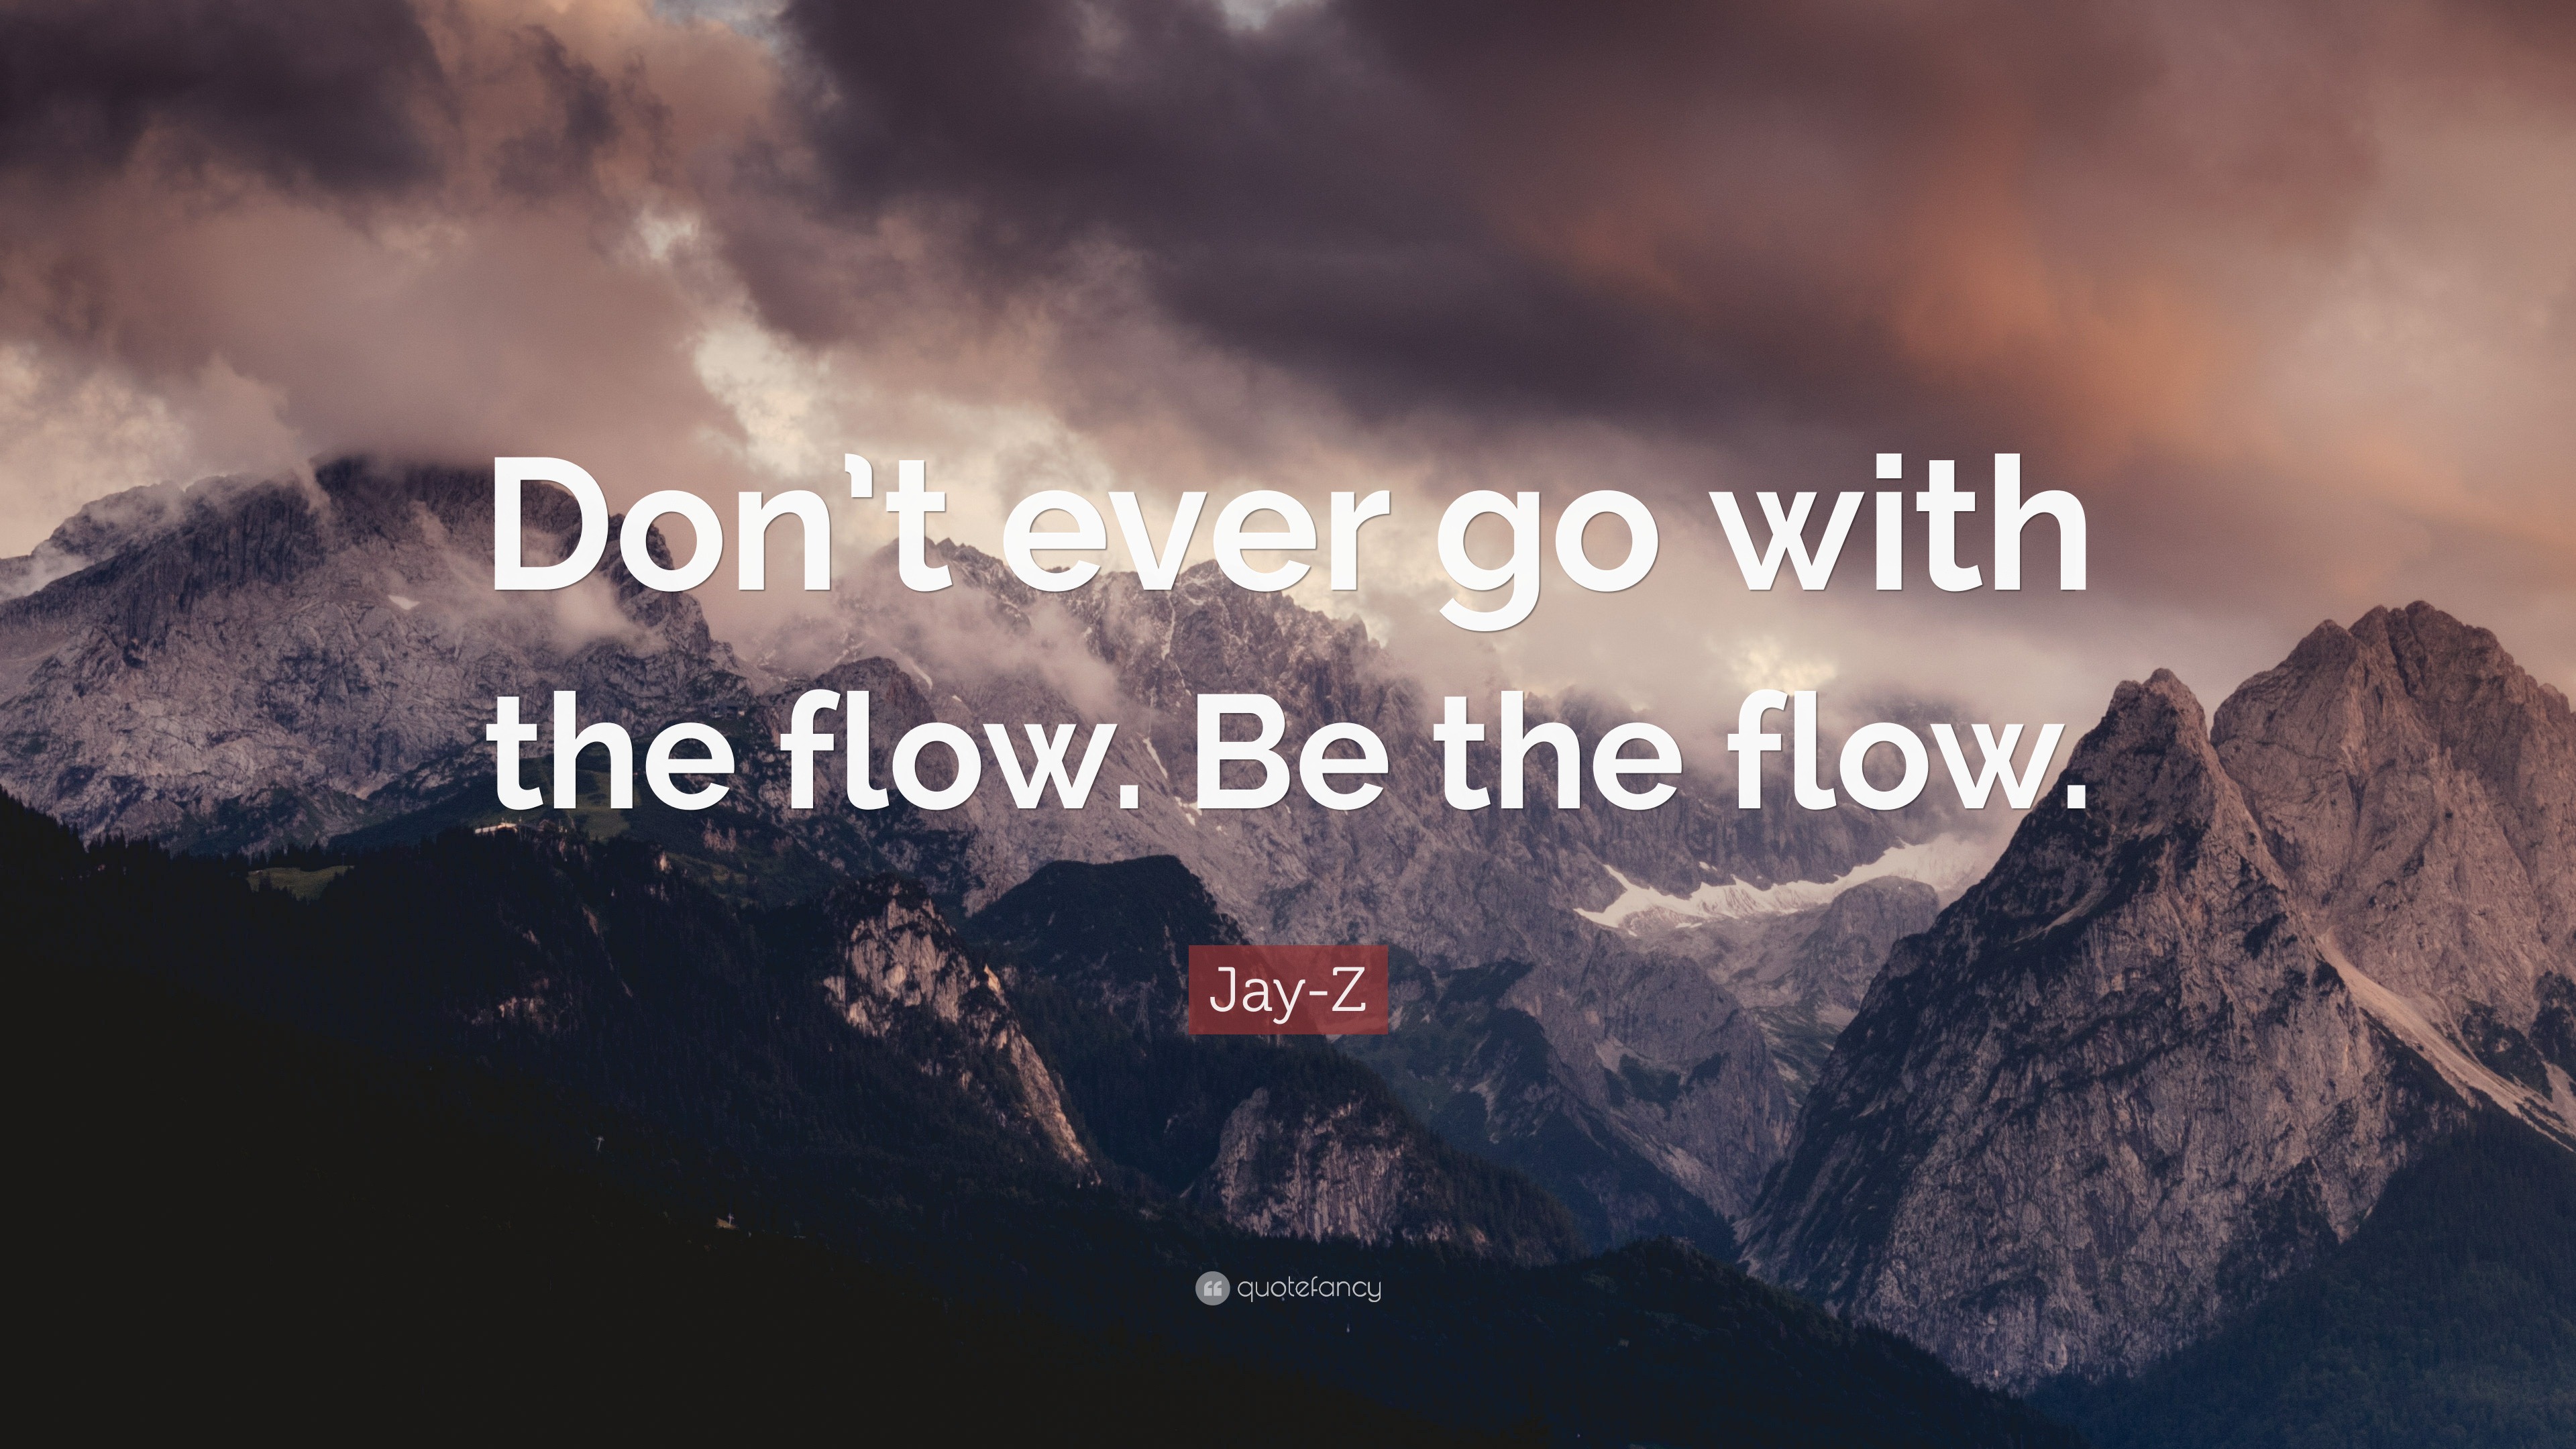 Jay-Z Quote: “Don’t ever go with the flow. Be the flow.” (9 wallpapers